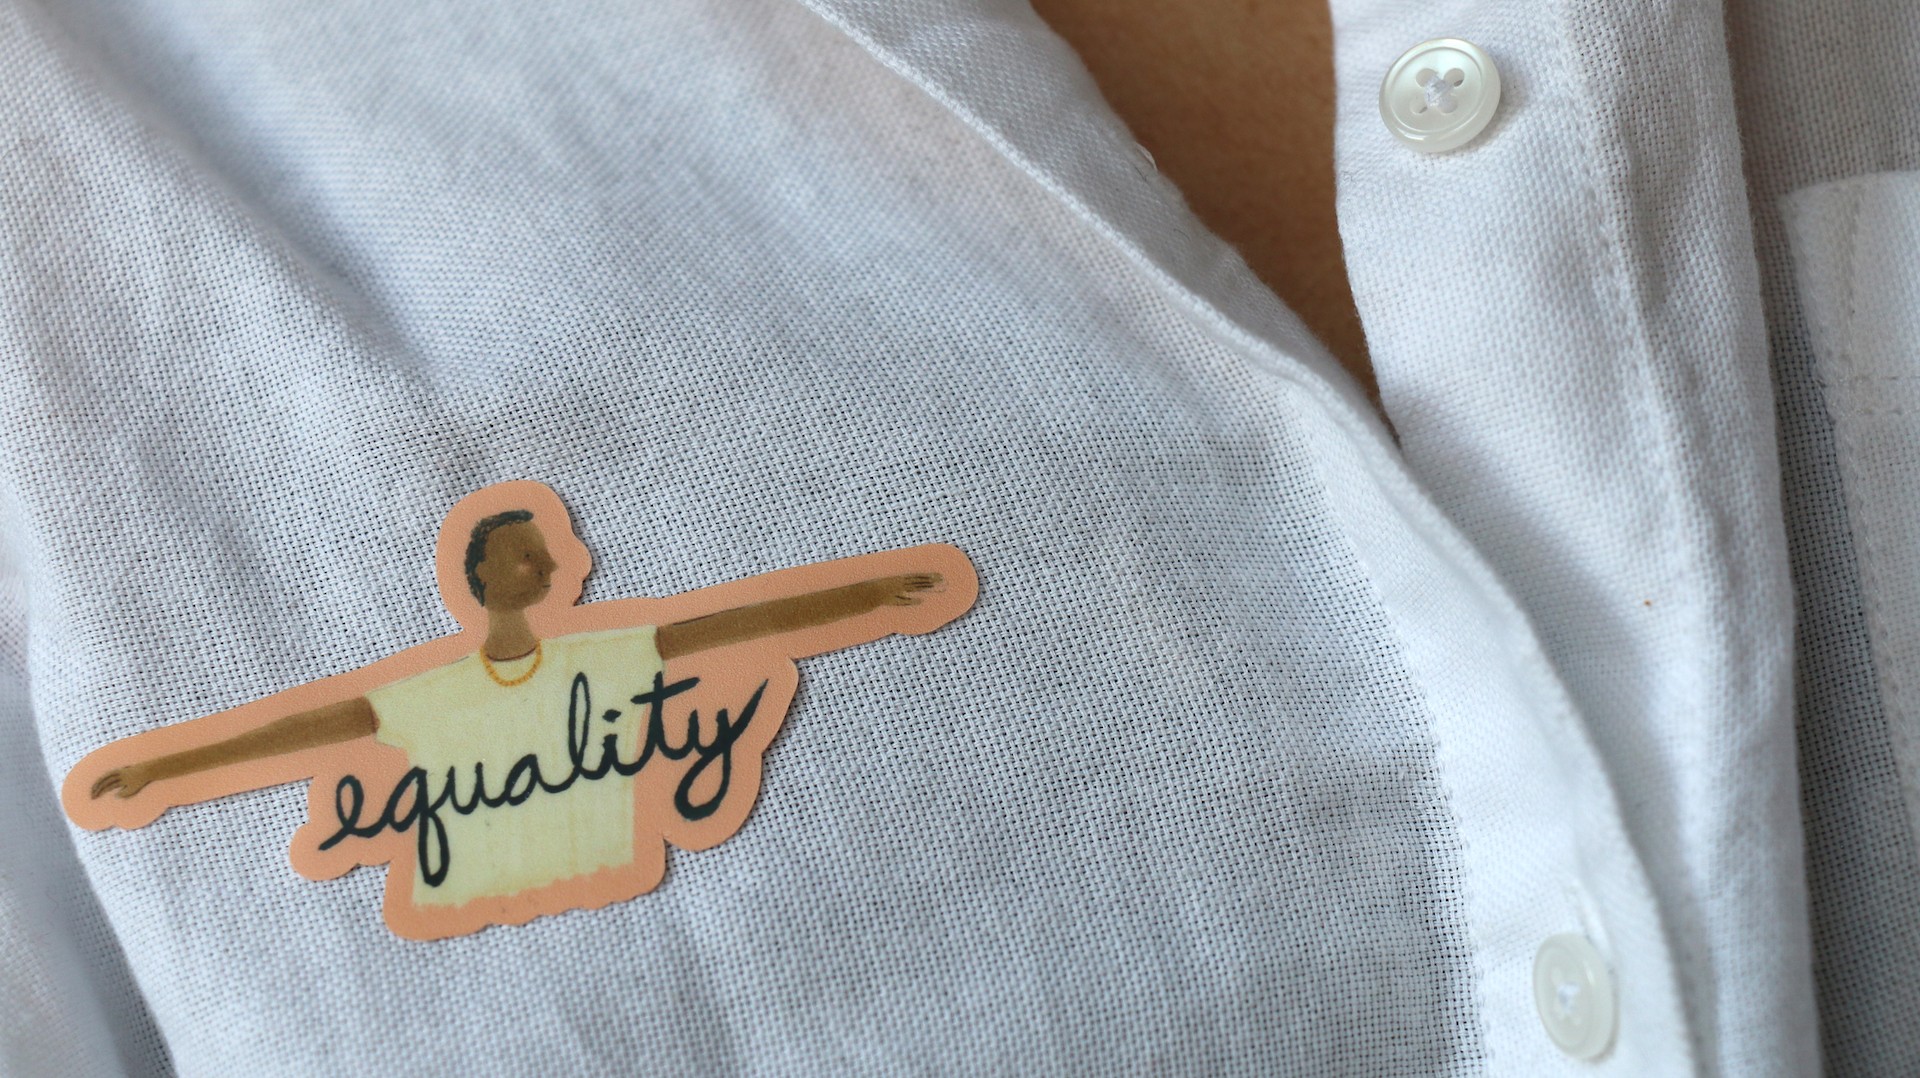 Sticker placed on white shirt. Sticker is of young man with arms outstretched to either side with text that reads "equality"